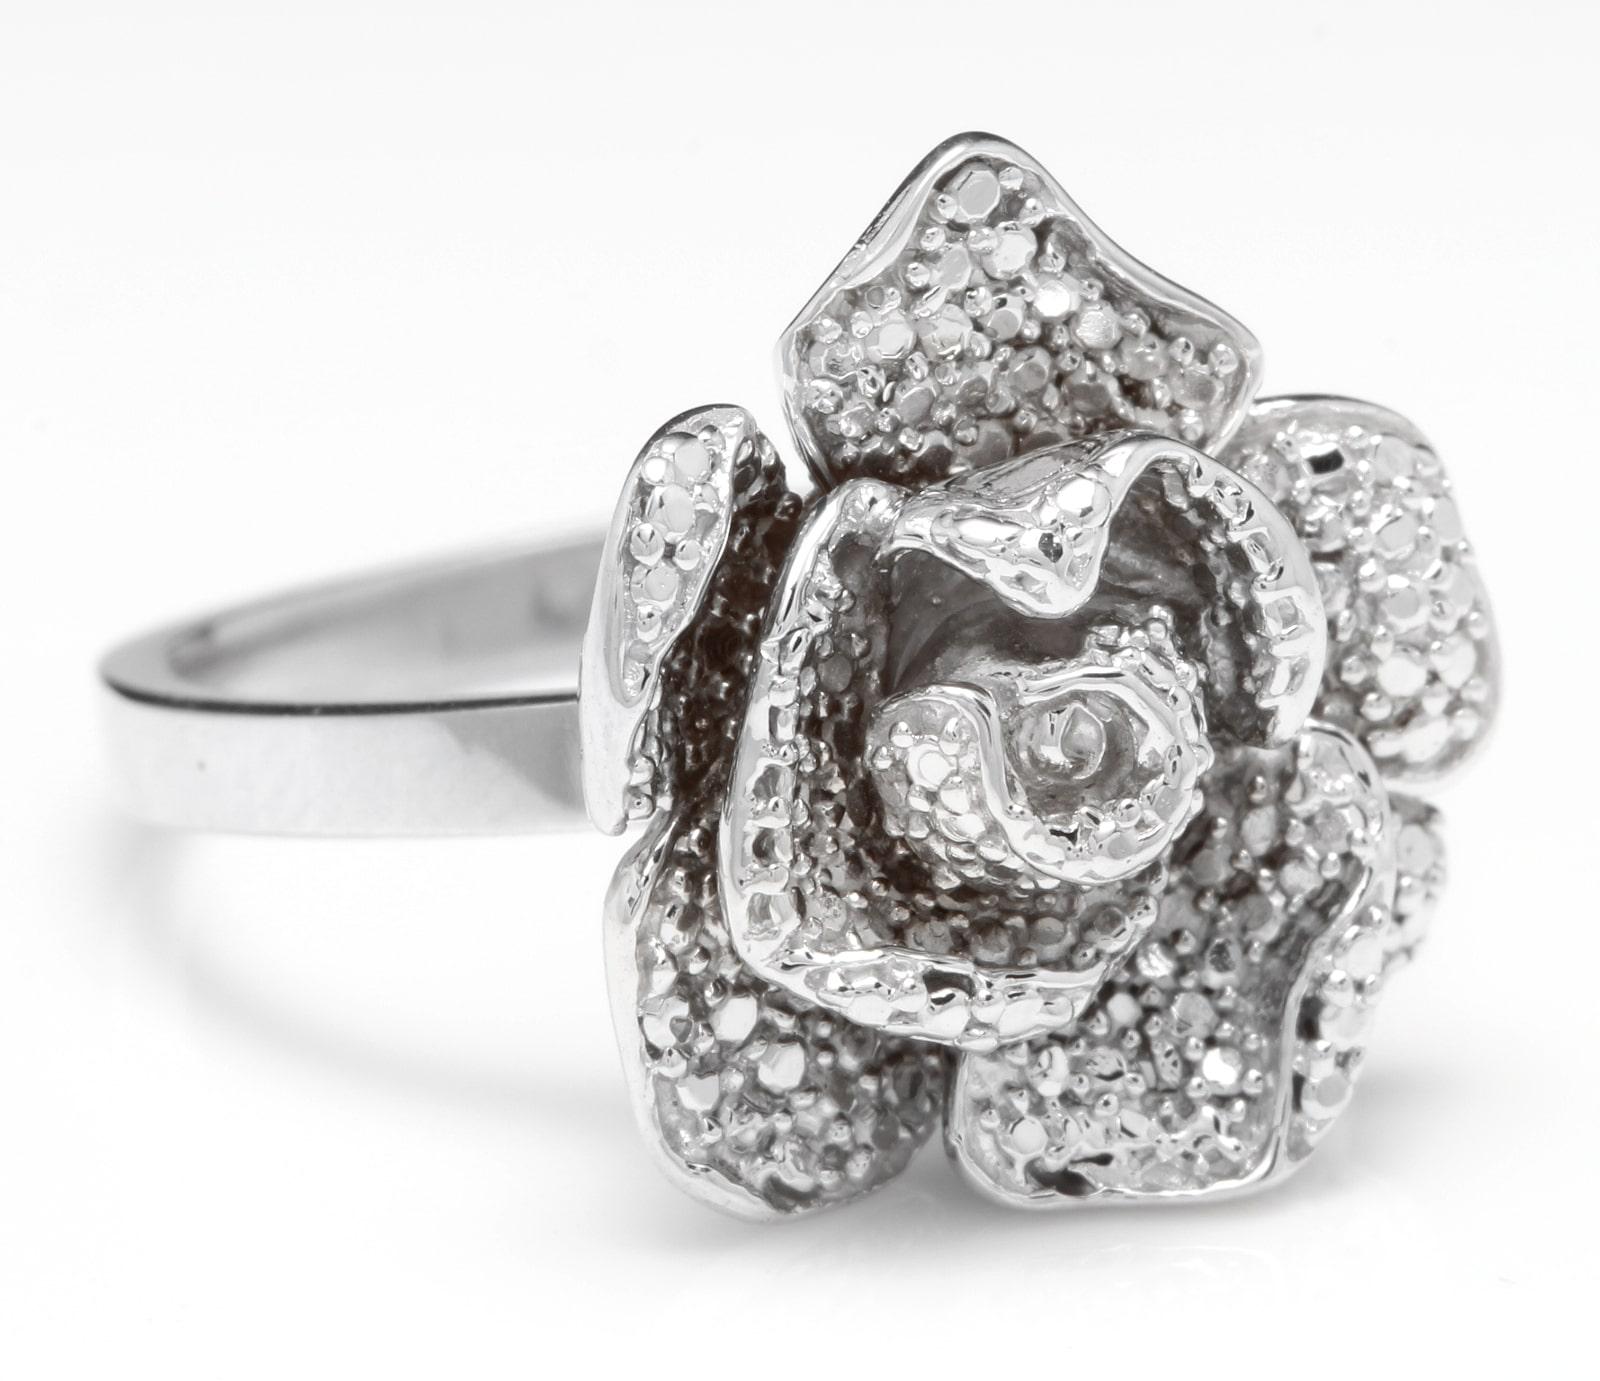 Beautiful 14K Solid White Gold Flower Ring

Suggested Replacement Value: $1,300.00

Stamped: 14K

Flower Measures: 16.60 x 16.25mm

Ring size: 7 (free sizing available)

Item total weight: 6.2 grams

Disclaimer: all weights, measurements and colors